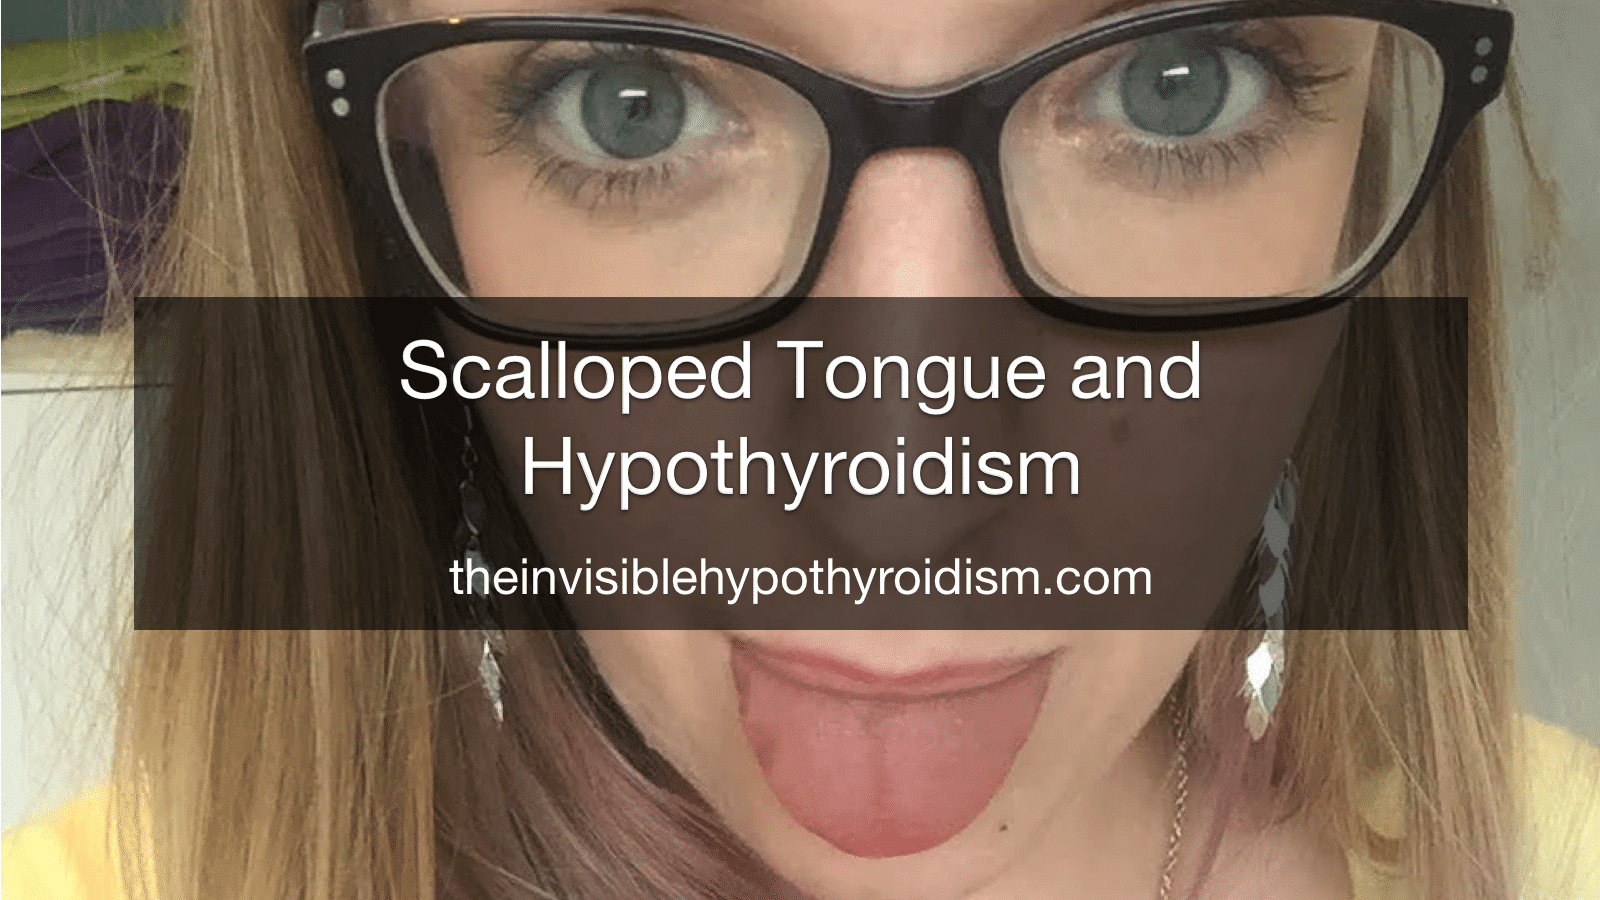 Scalloped Tongue and Hypothyroidism